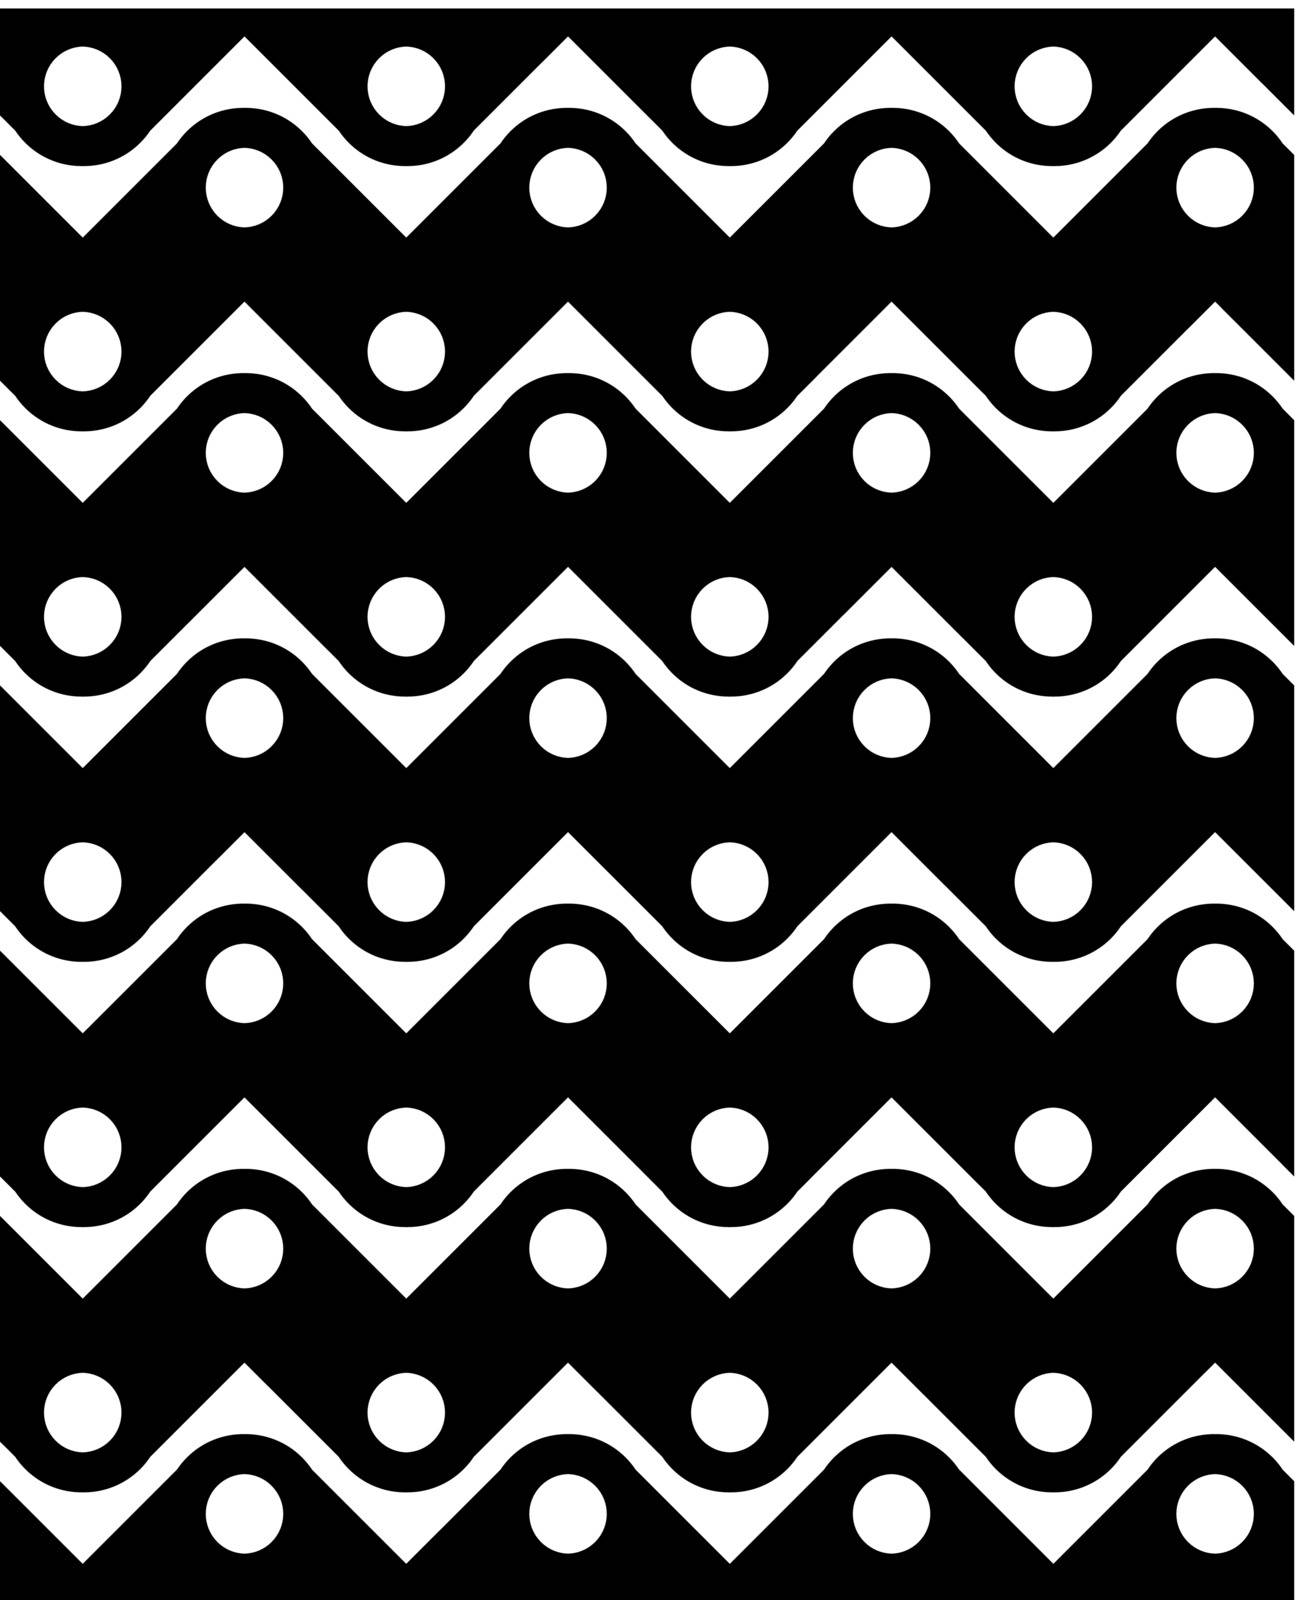 Abstract geometric black and white background, seamless pattern, by Sylverarts